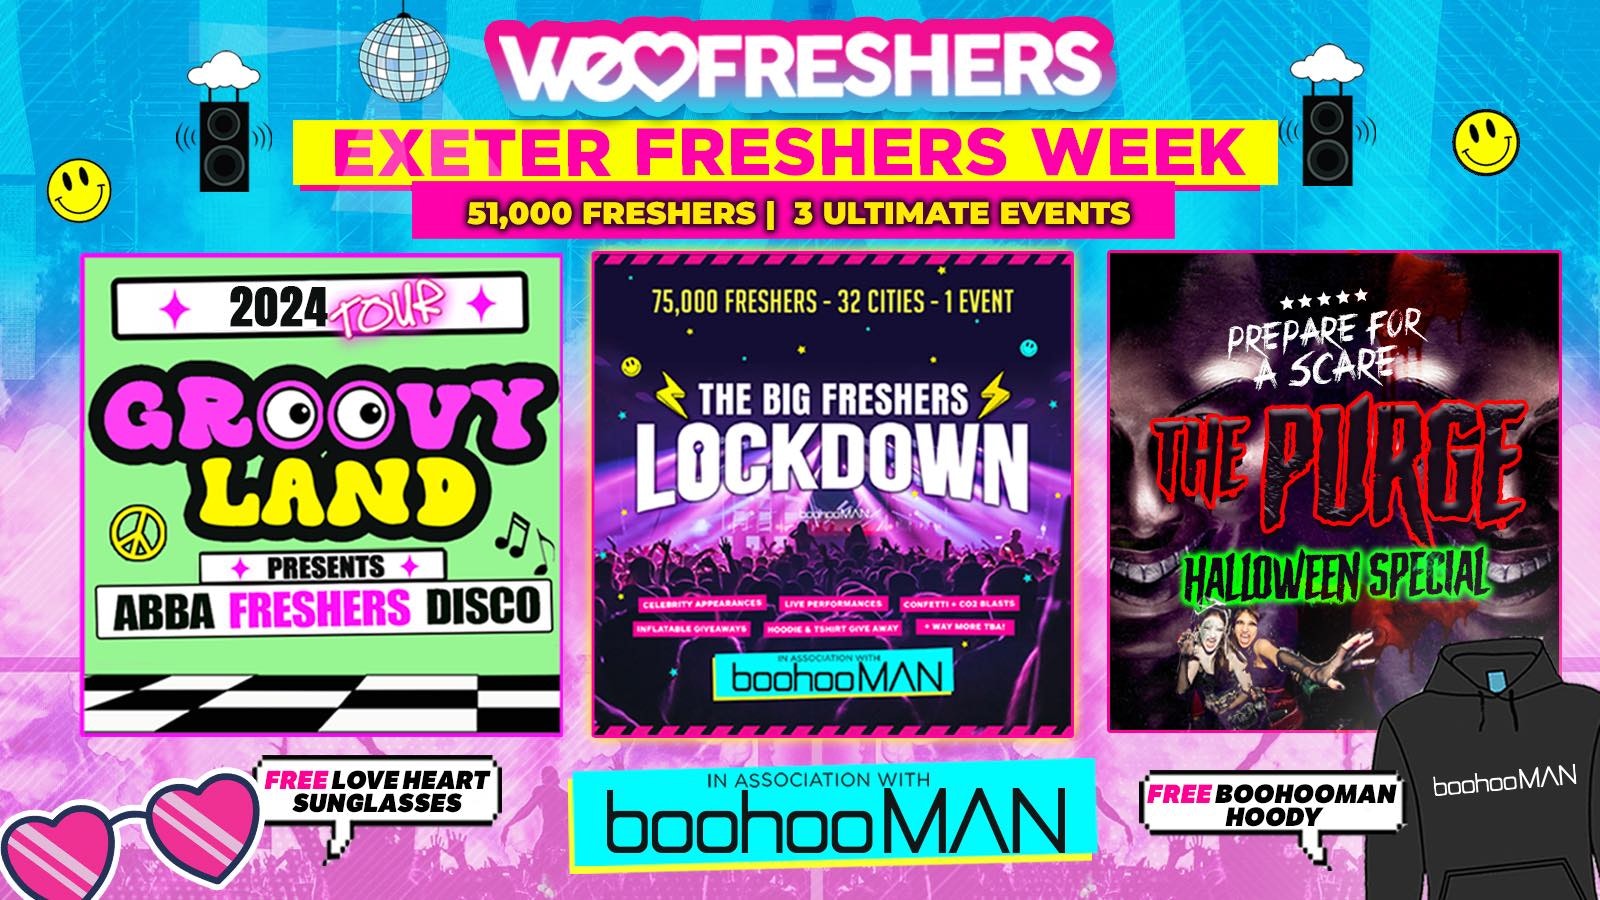 WE LOVE EXETER FRESHERS 2024 in association with boohooMAN -3 EVENTS❗FREE QUEUE JUMP Limited Time Only ❗